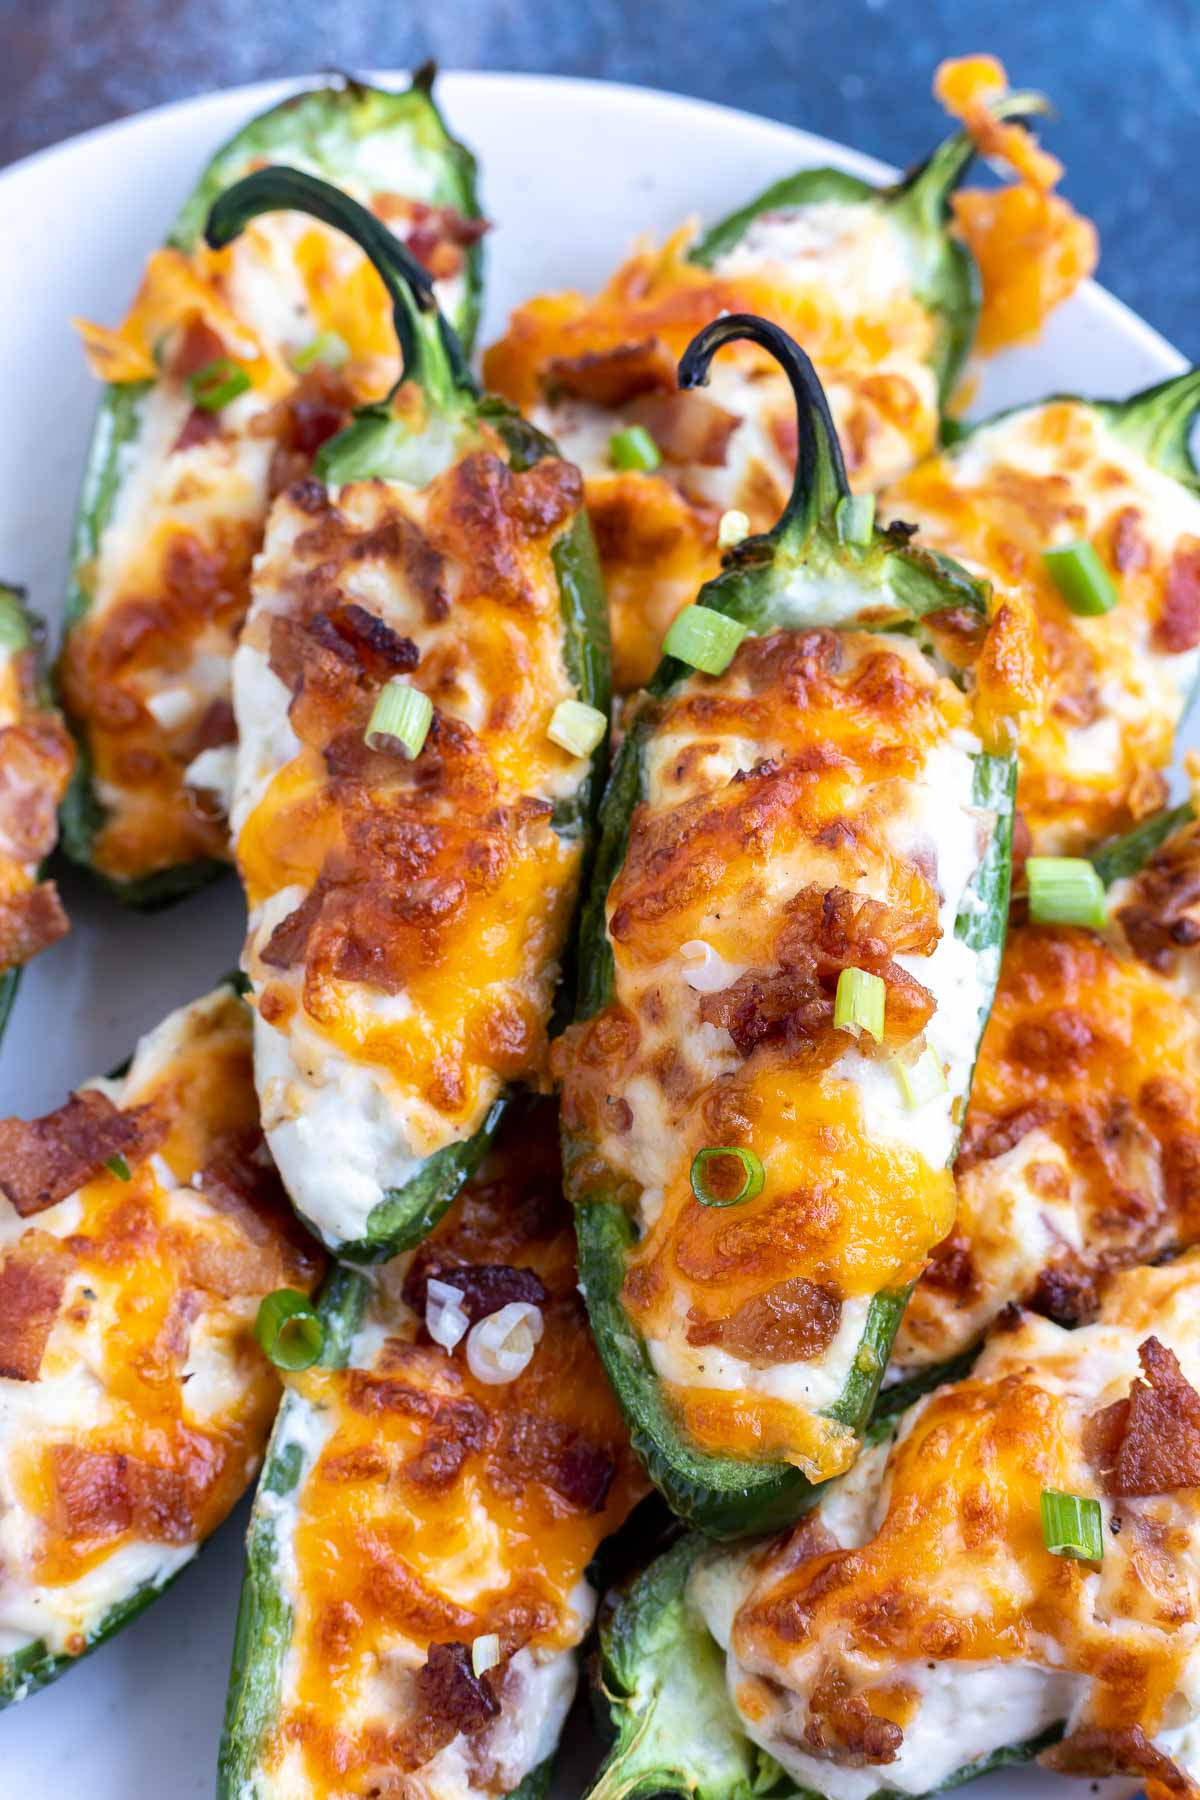 Jalapeno Poppers In Air Fryer Inspirational Air Fryer Jalapeno Poppers Tasty Air Fryer Recipes